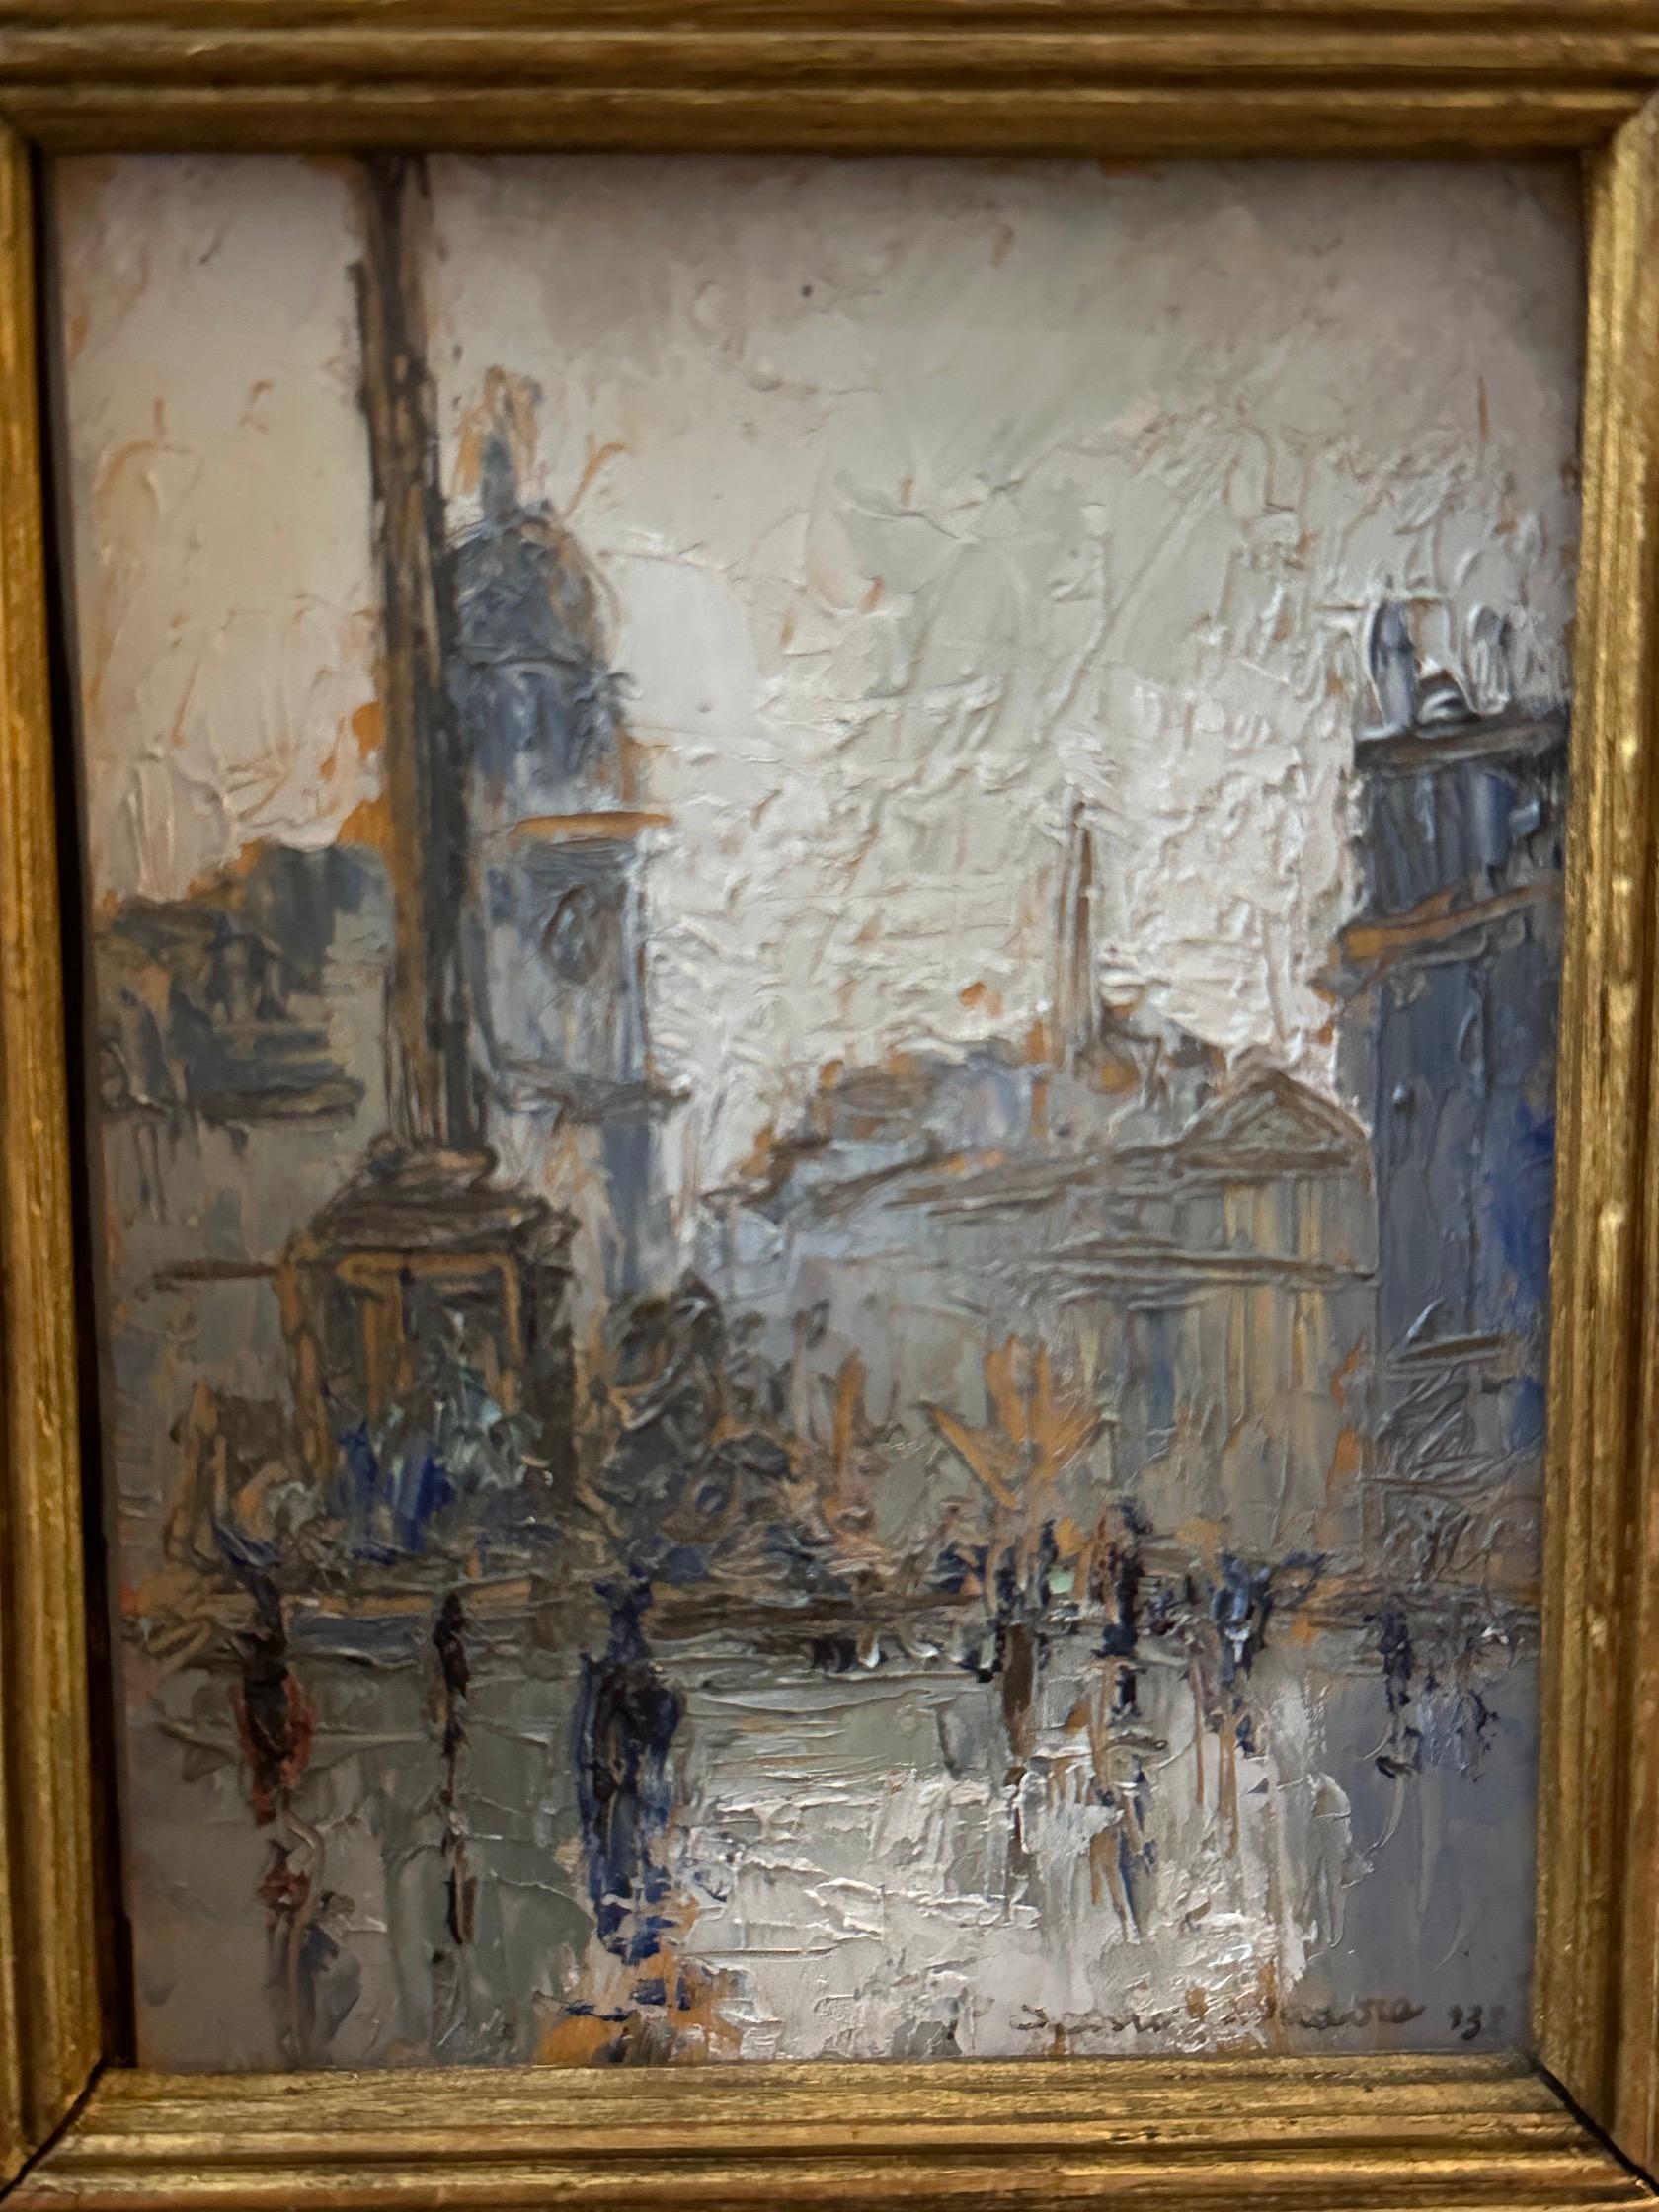 Pietro Sansalvadore was active during the early to middle of the 20th century. 

He painted in an Impressionist manner and on a small scale.

Acquiring a late 19th-century Impressionist painting of Hammersmith Bridge by the Italian painter Pietro